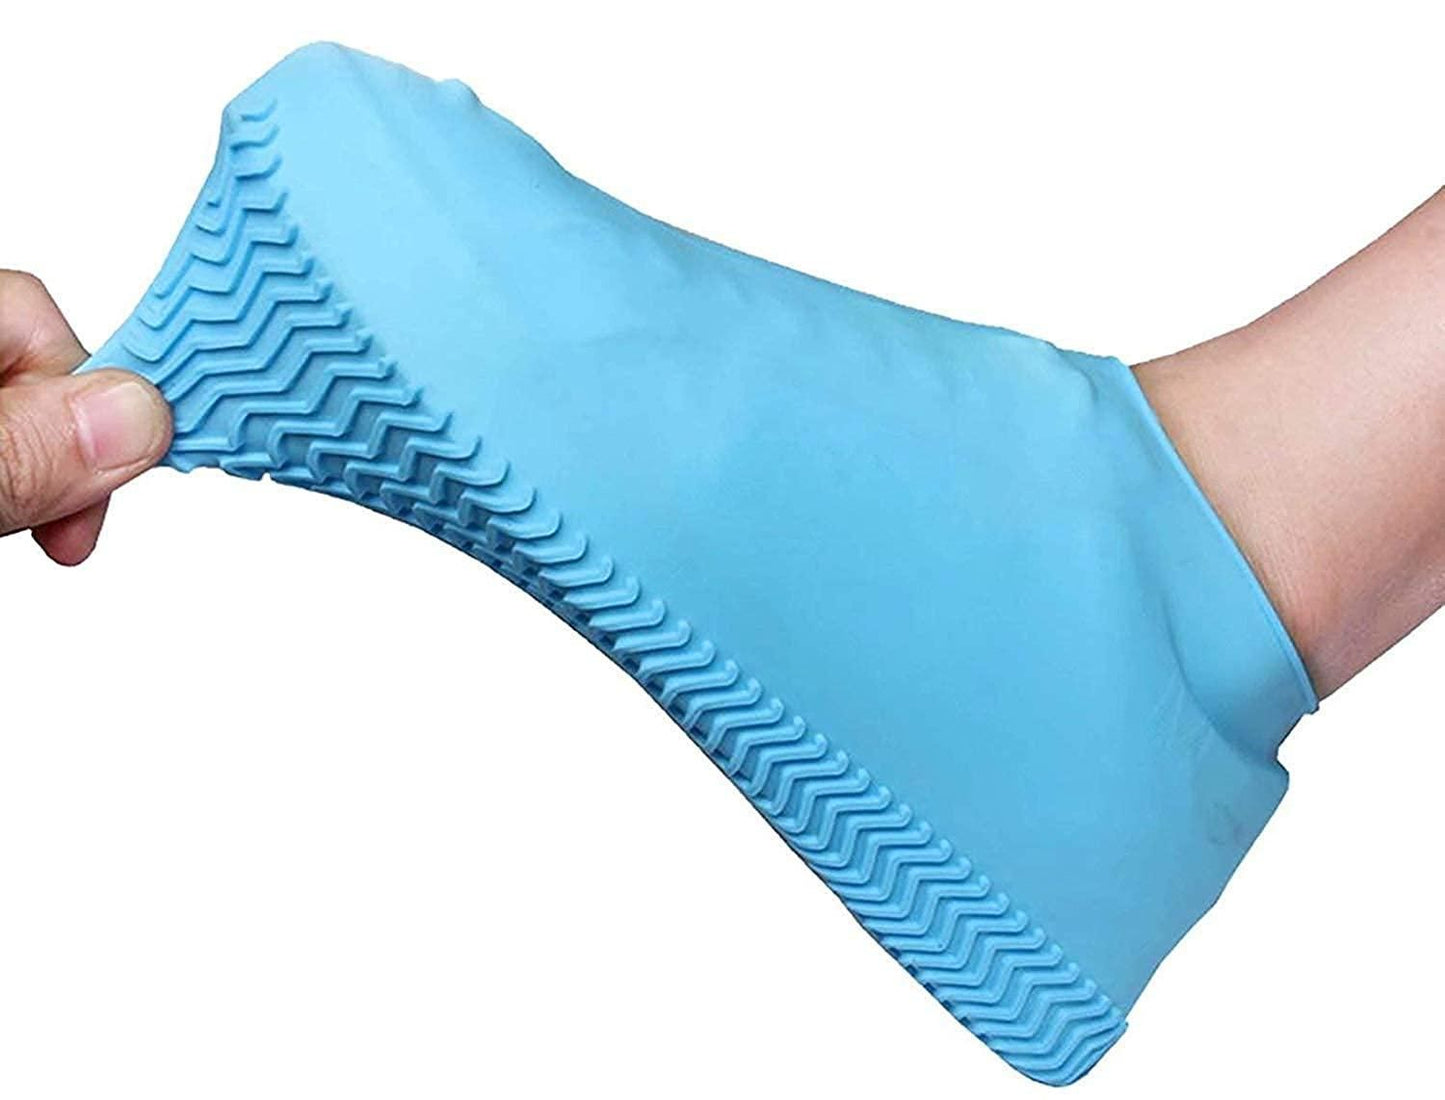 Waterproof Silicone Shoes Cover